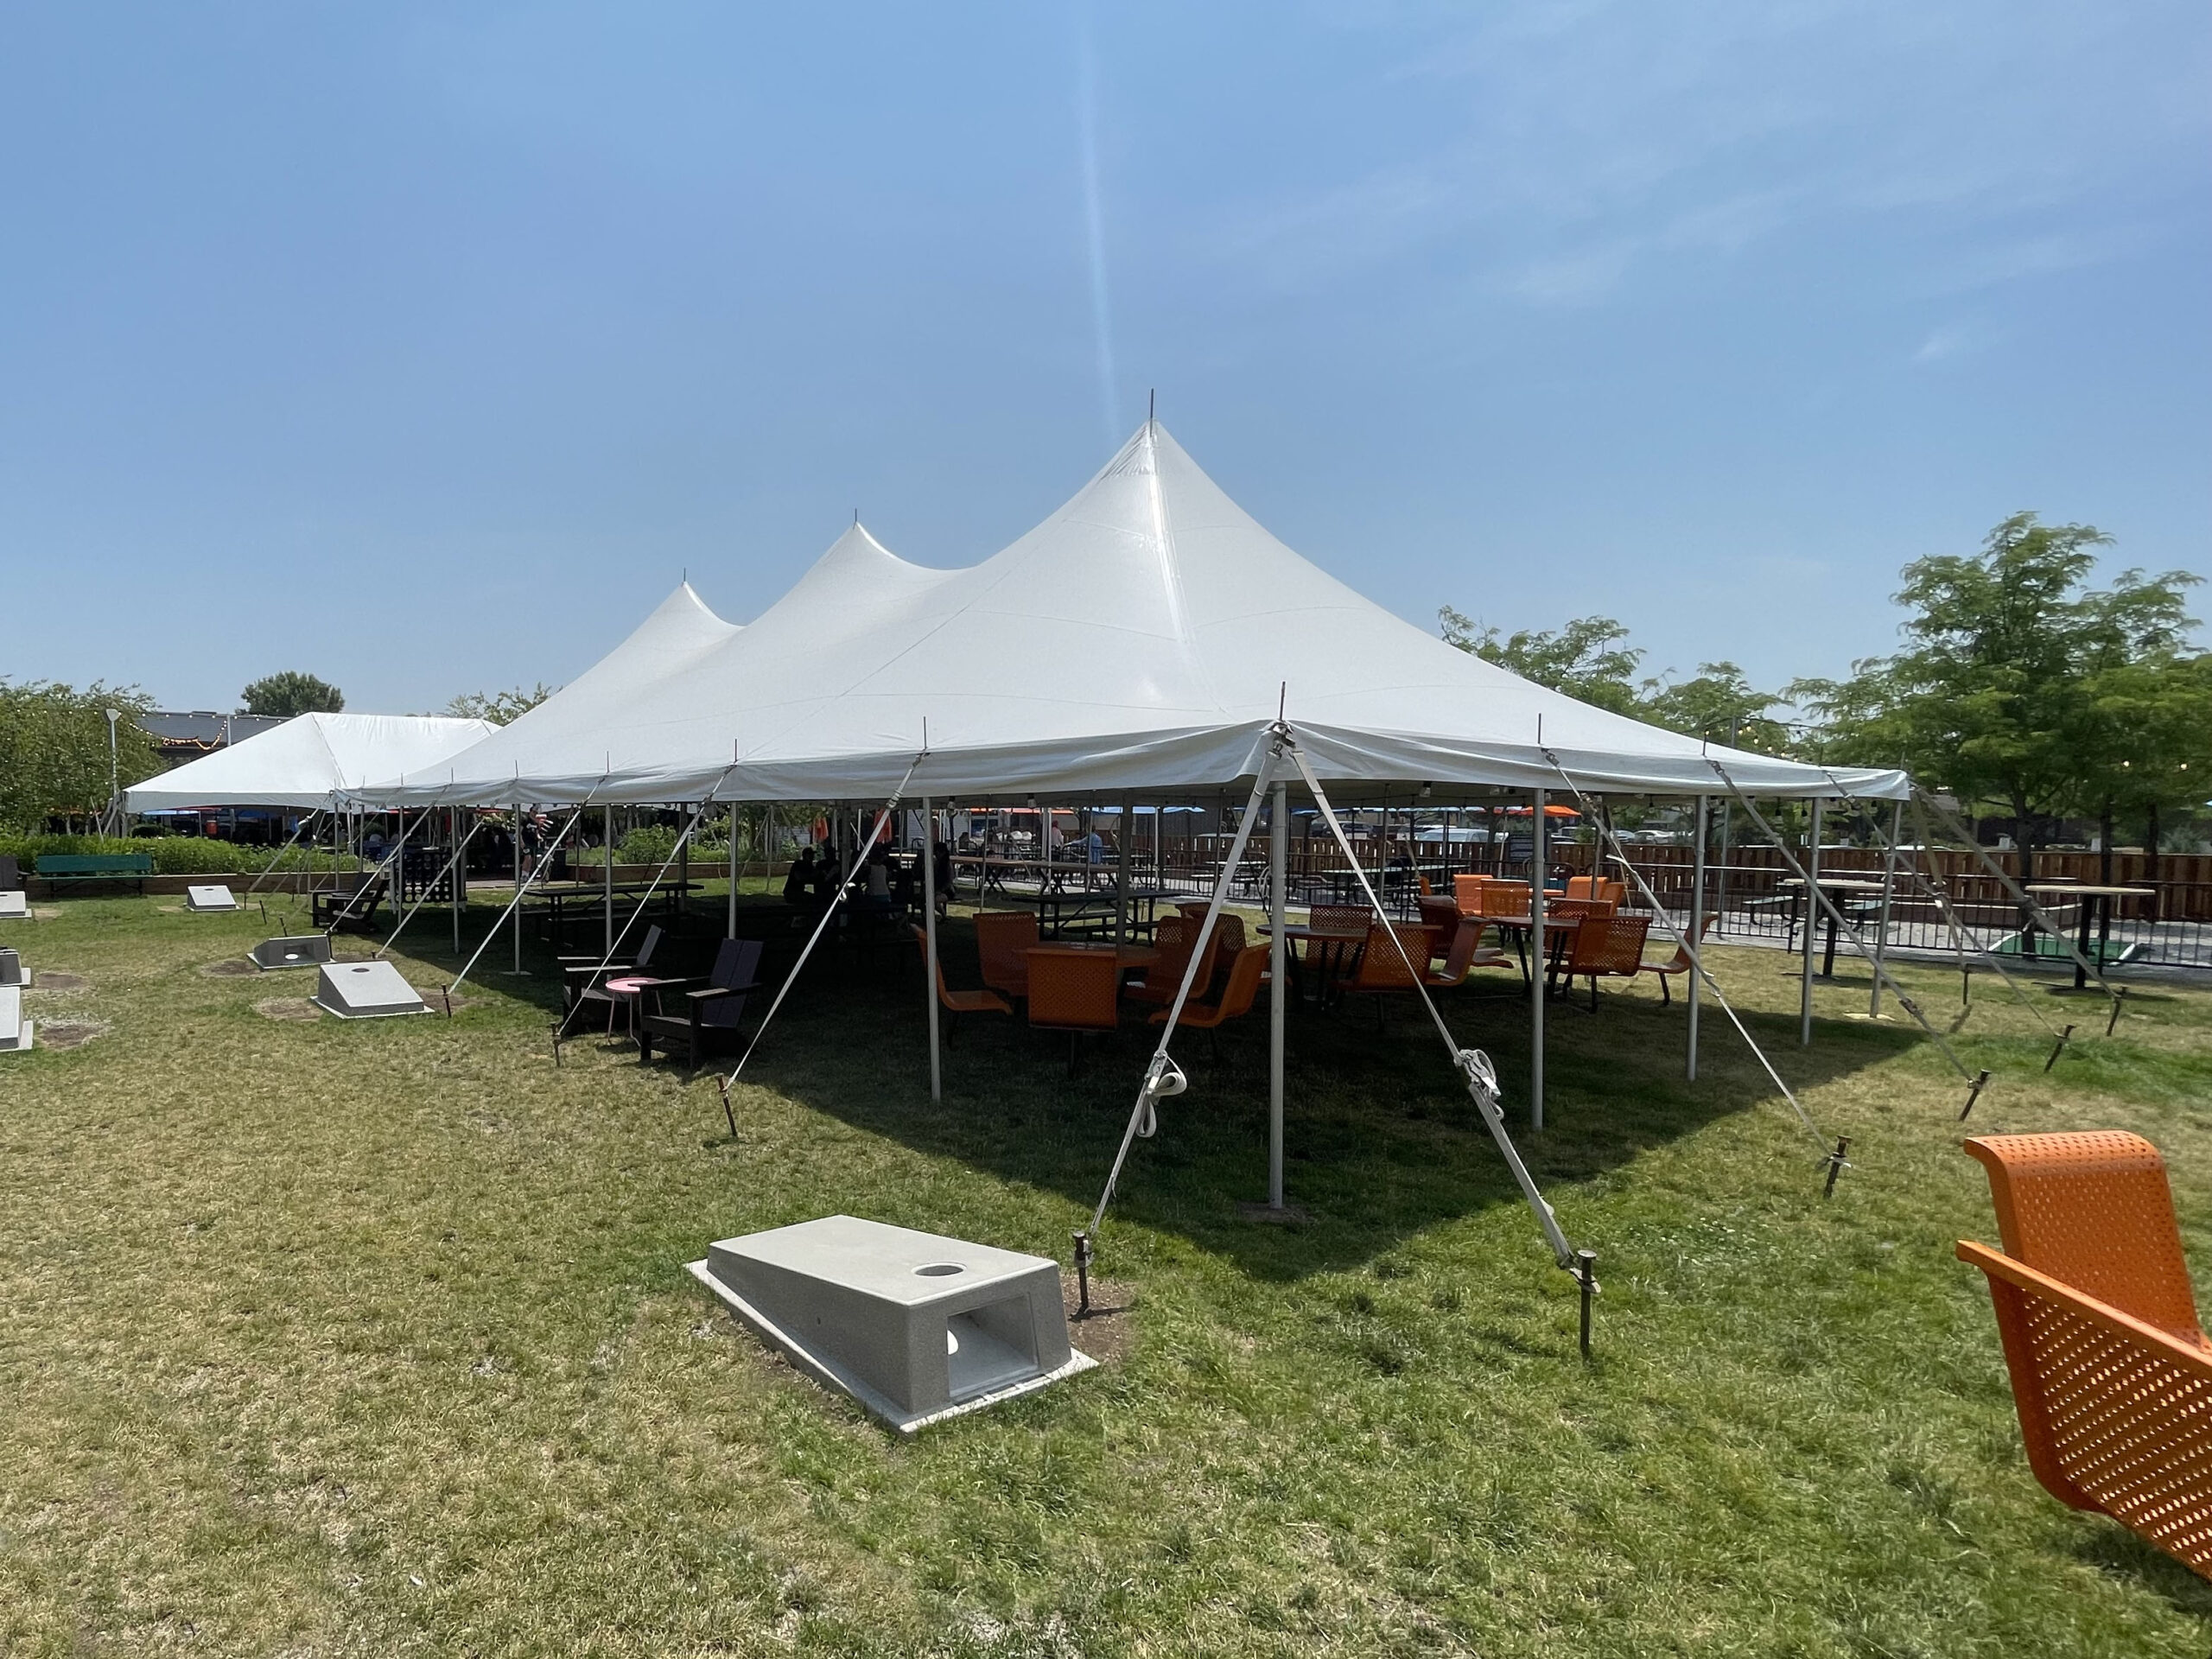 30’ x 60' rope and pole tent in the back is the 30' x 45' frame event tent at Big Grove Brewery in Iowa City, IA